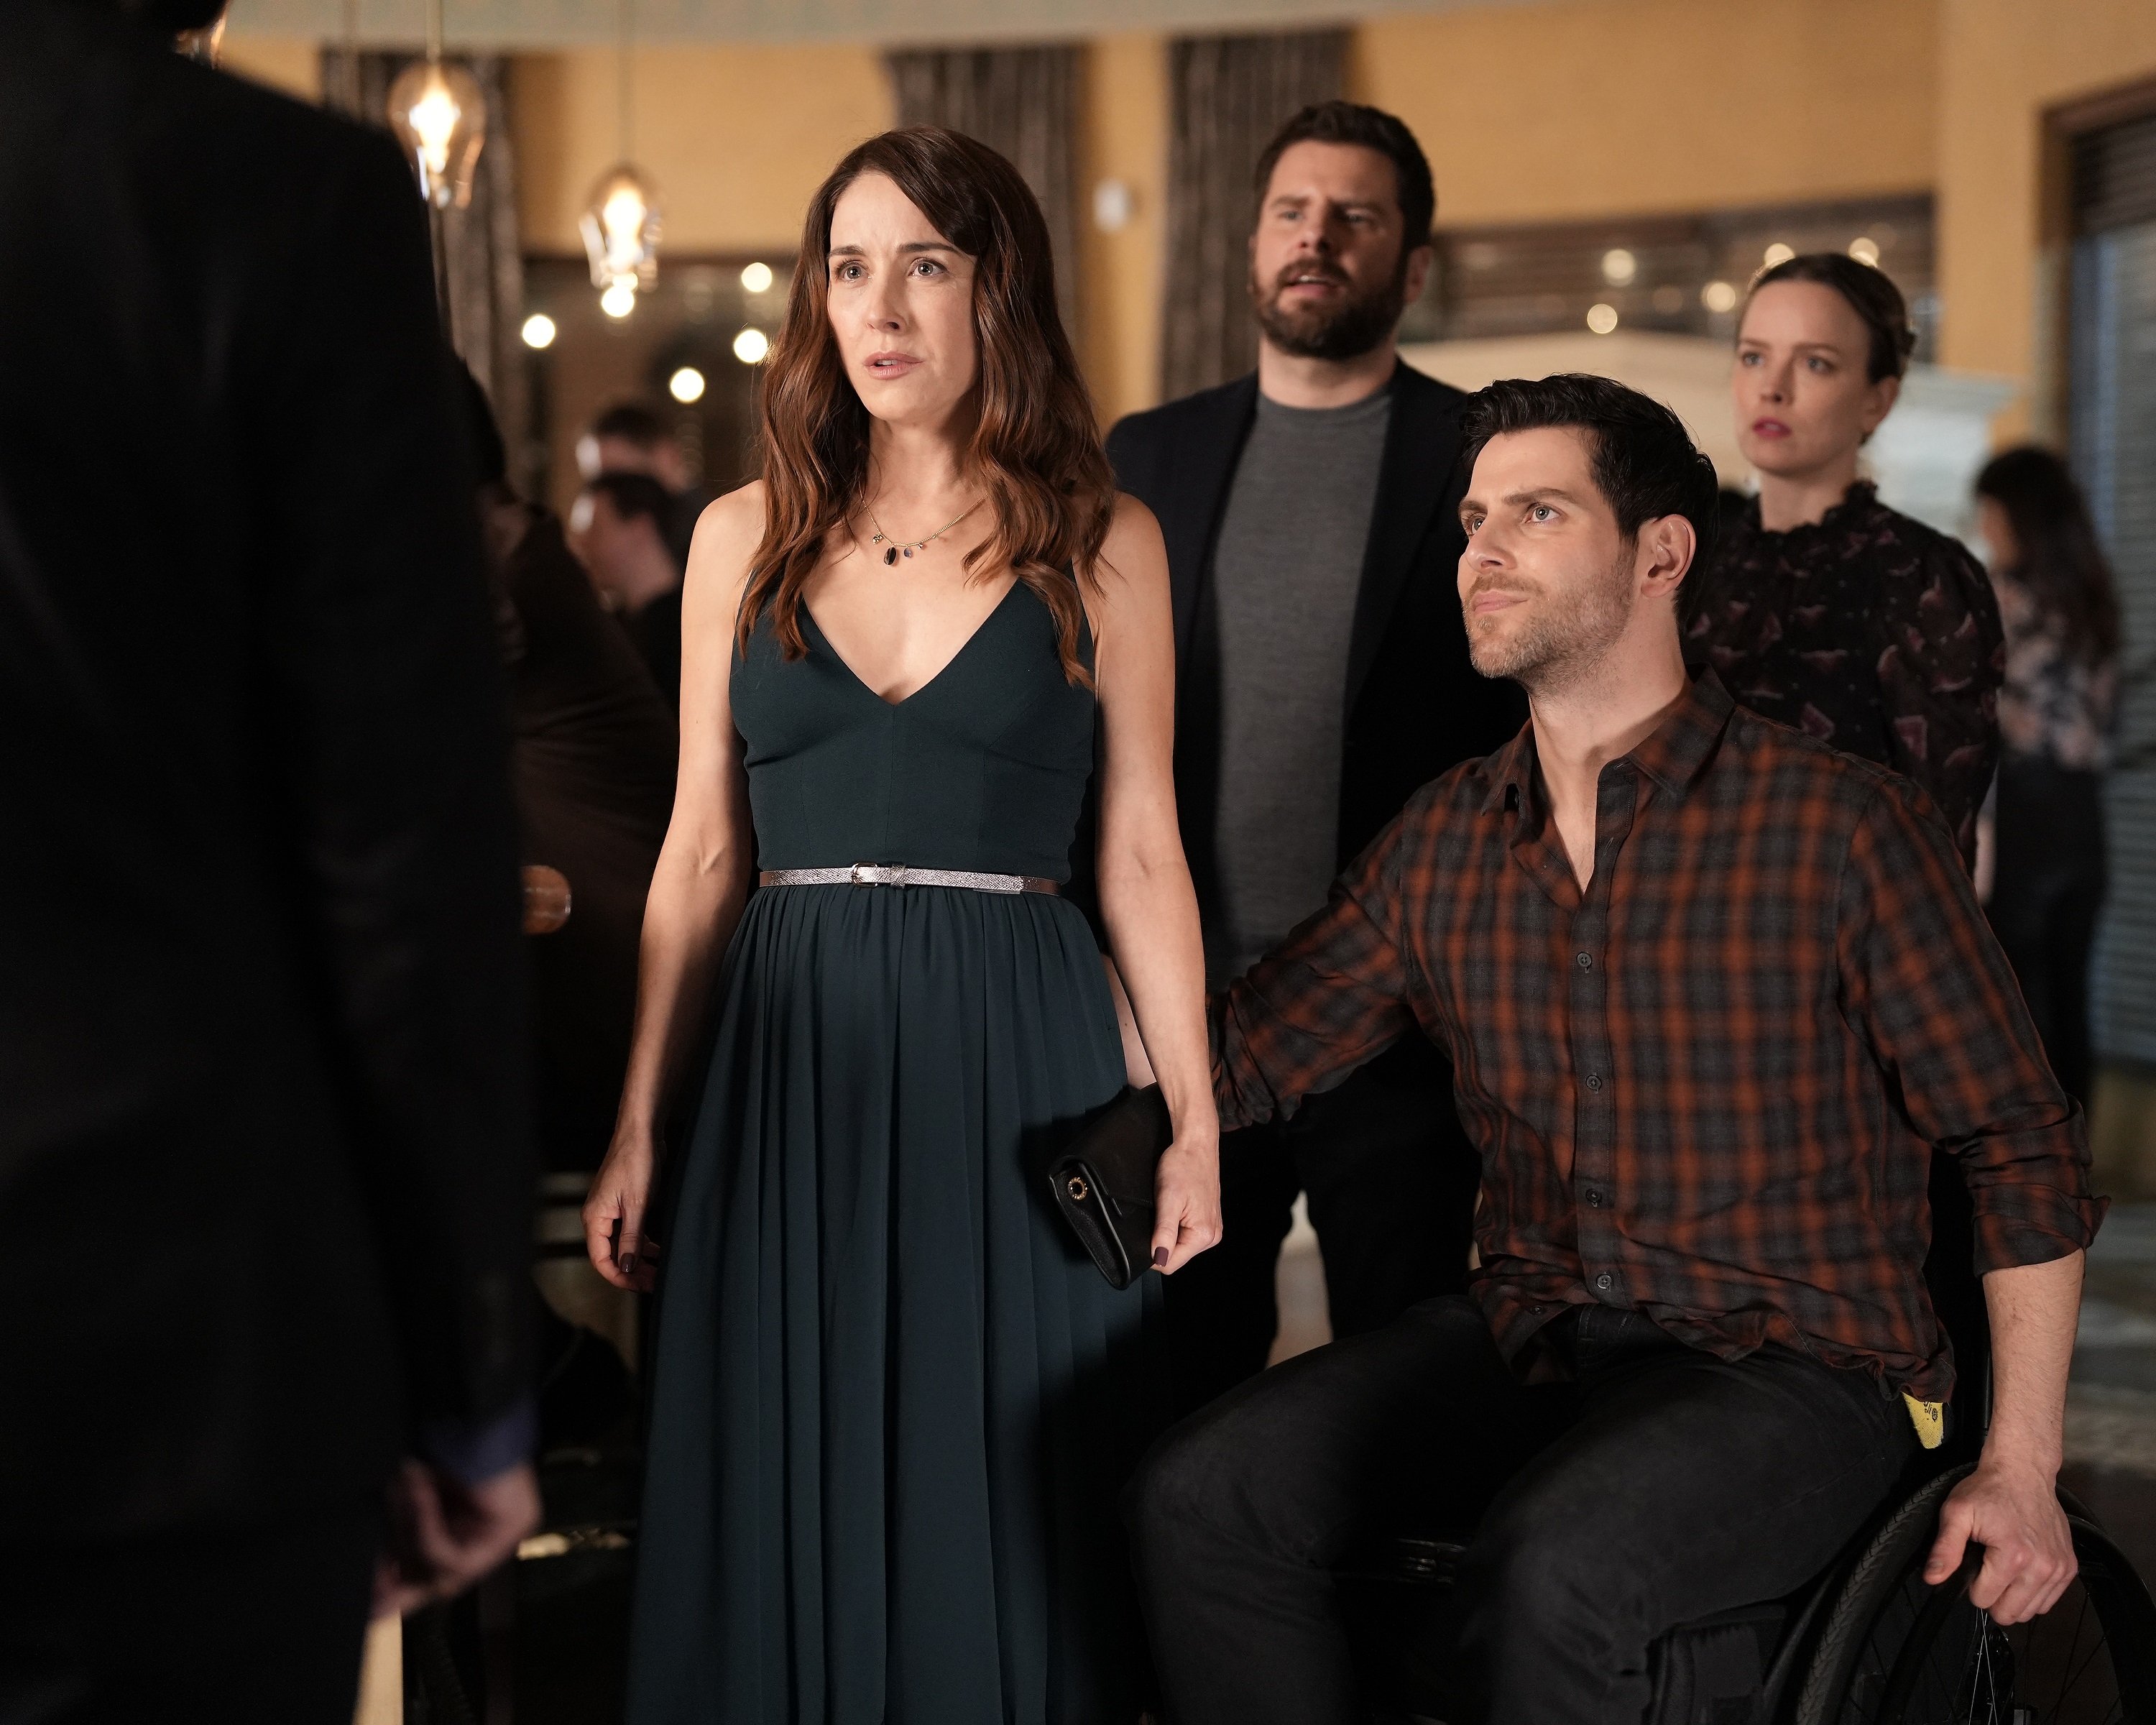 'A Million Little Things' cast members Erin Karpluk, David Giuntoli, James Roday Rodriguez, and Allison Miller staring at someone as Anna, Eddie, Gary, and Maggie